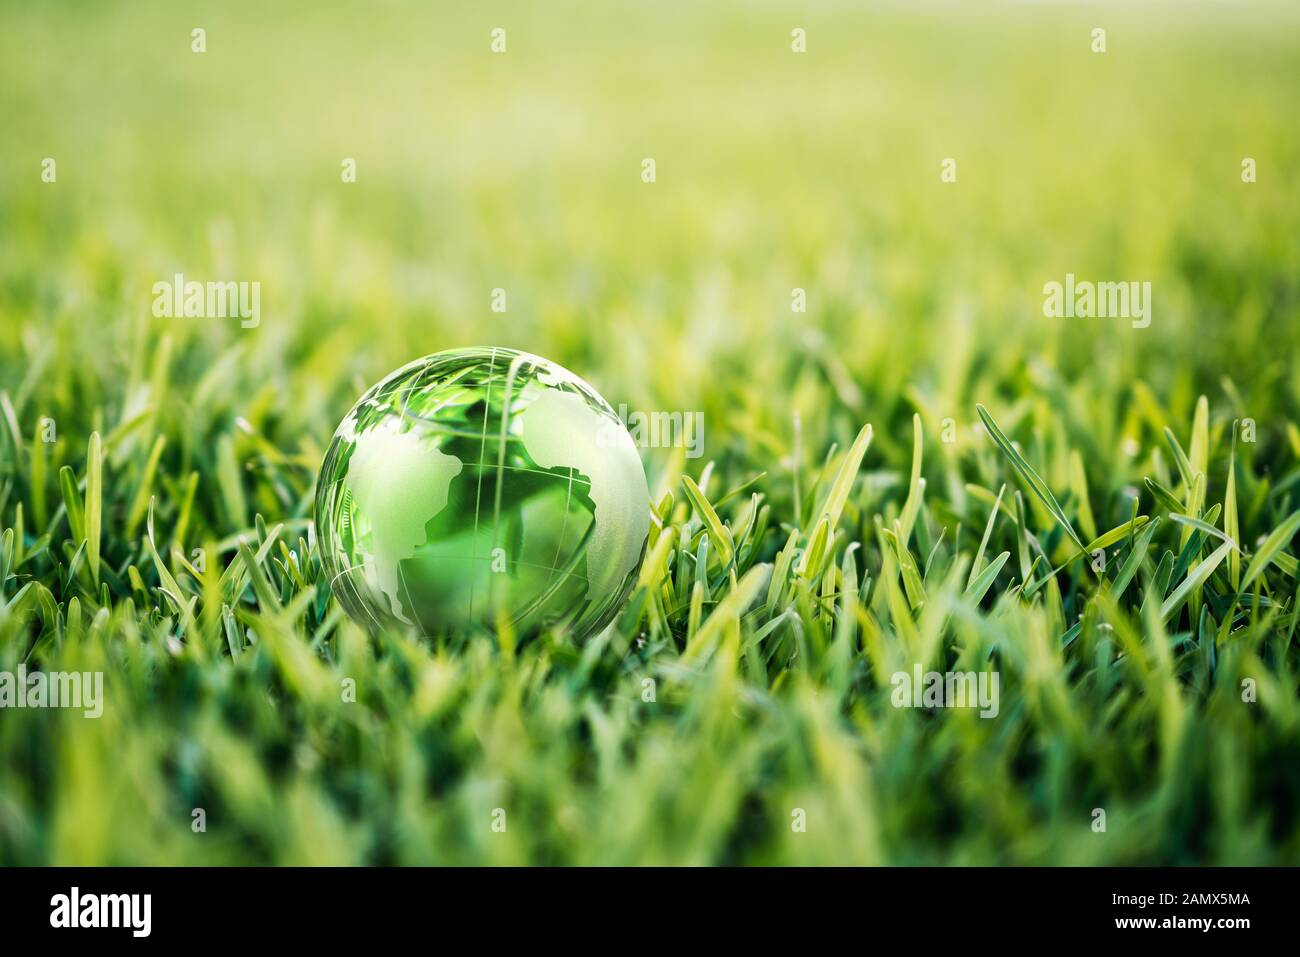 tree wasted plastic bottle in shape of the symbol of recycling on green background Stock Photo